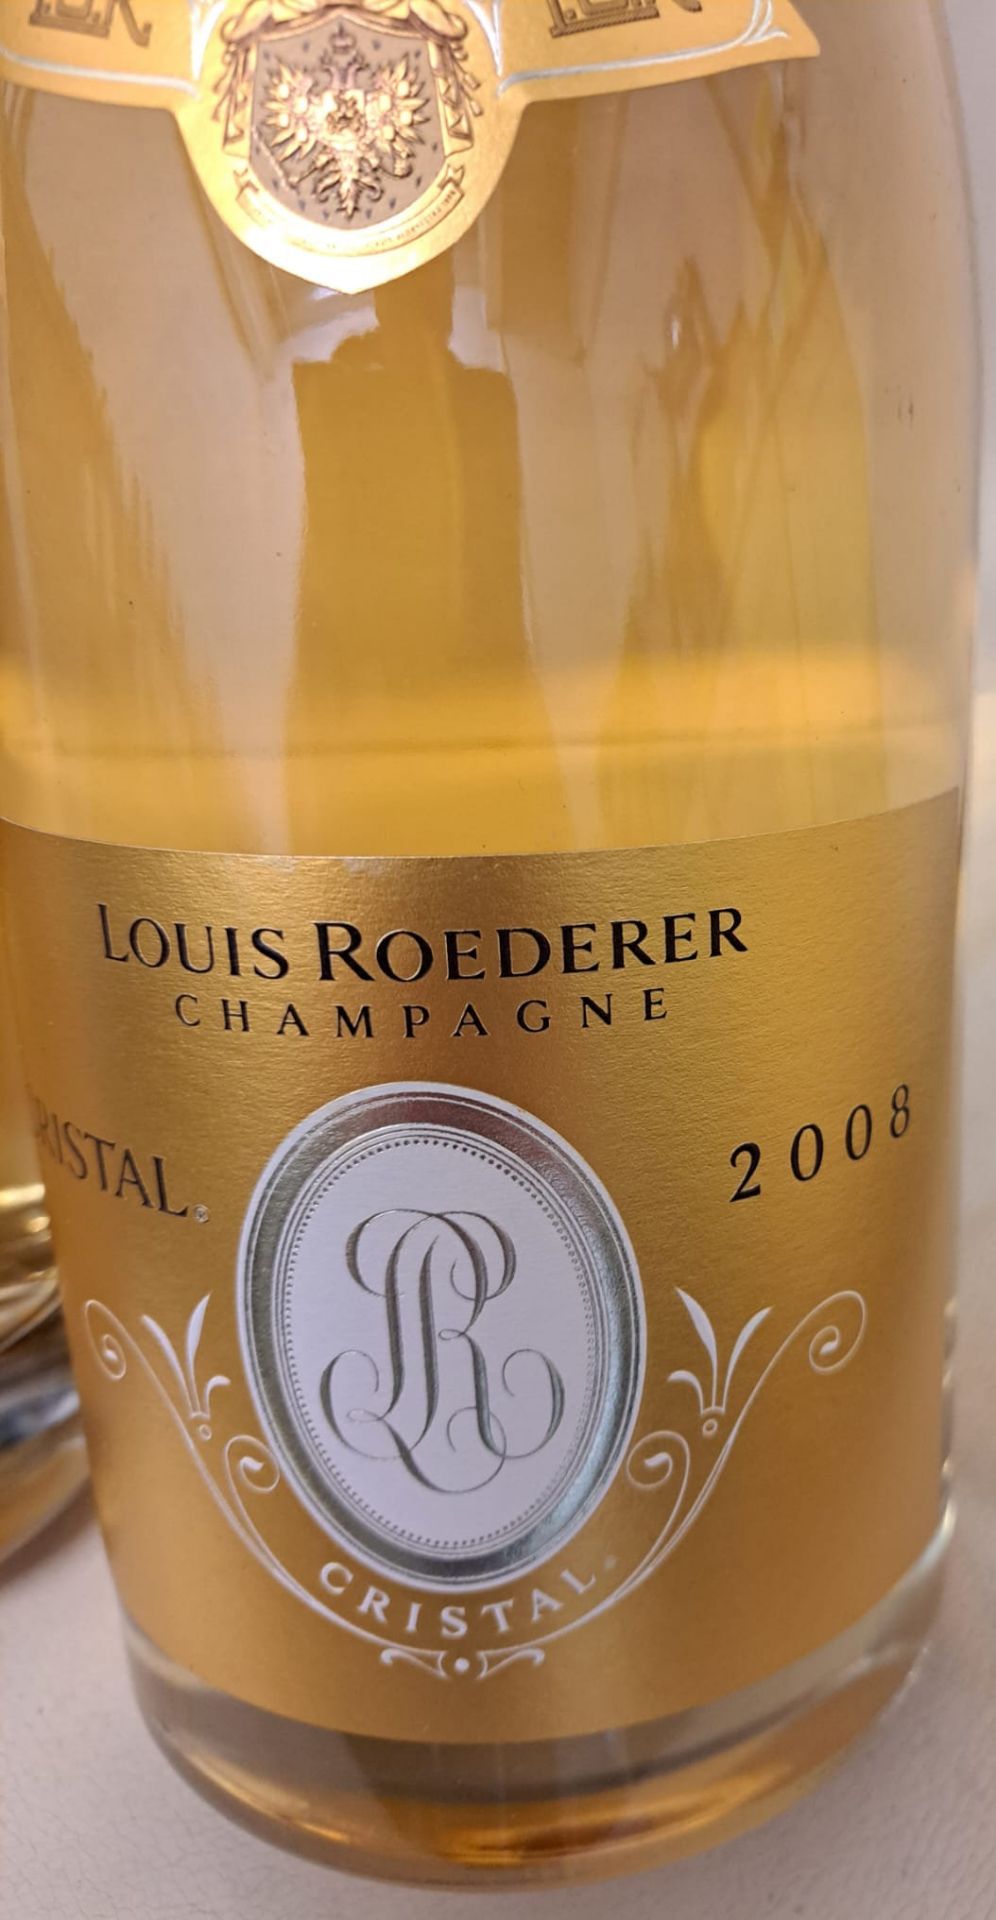 1 x Magnum of 2008 Louis Roederer Cristal Blanc Champagne - Retail Price £1150 - Ref: WAS045B - - Image 2 of 2